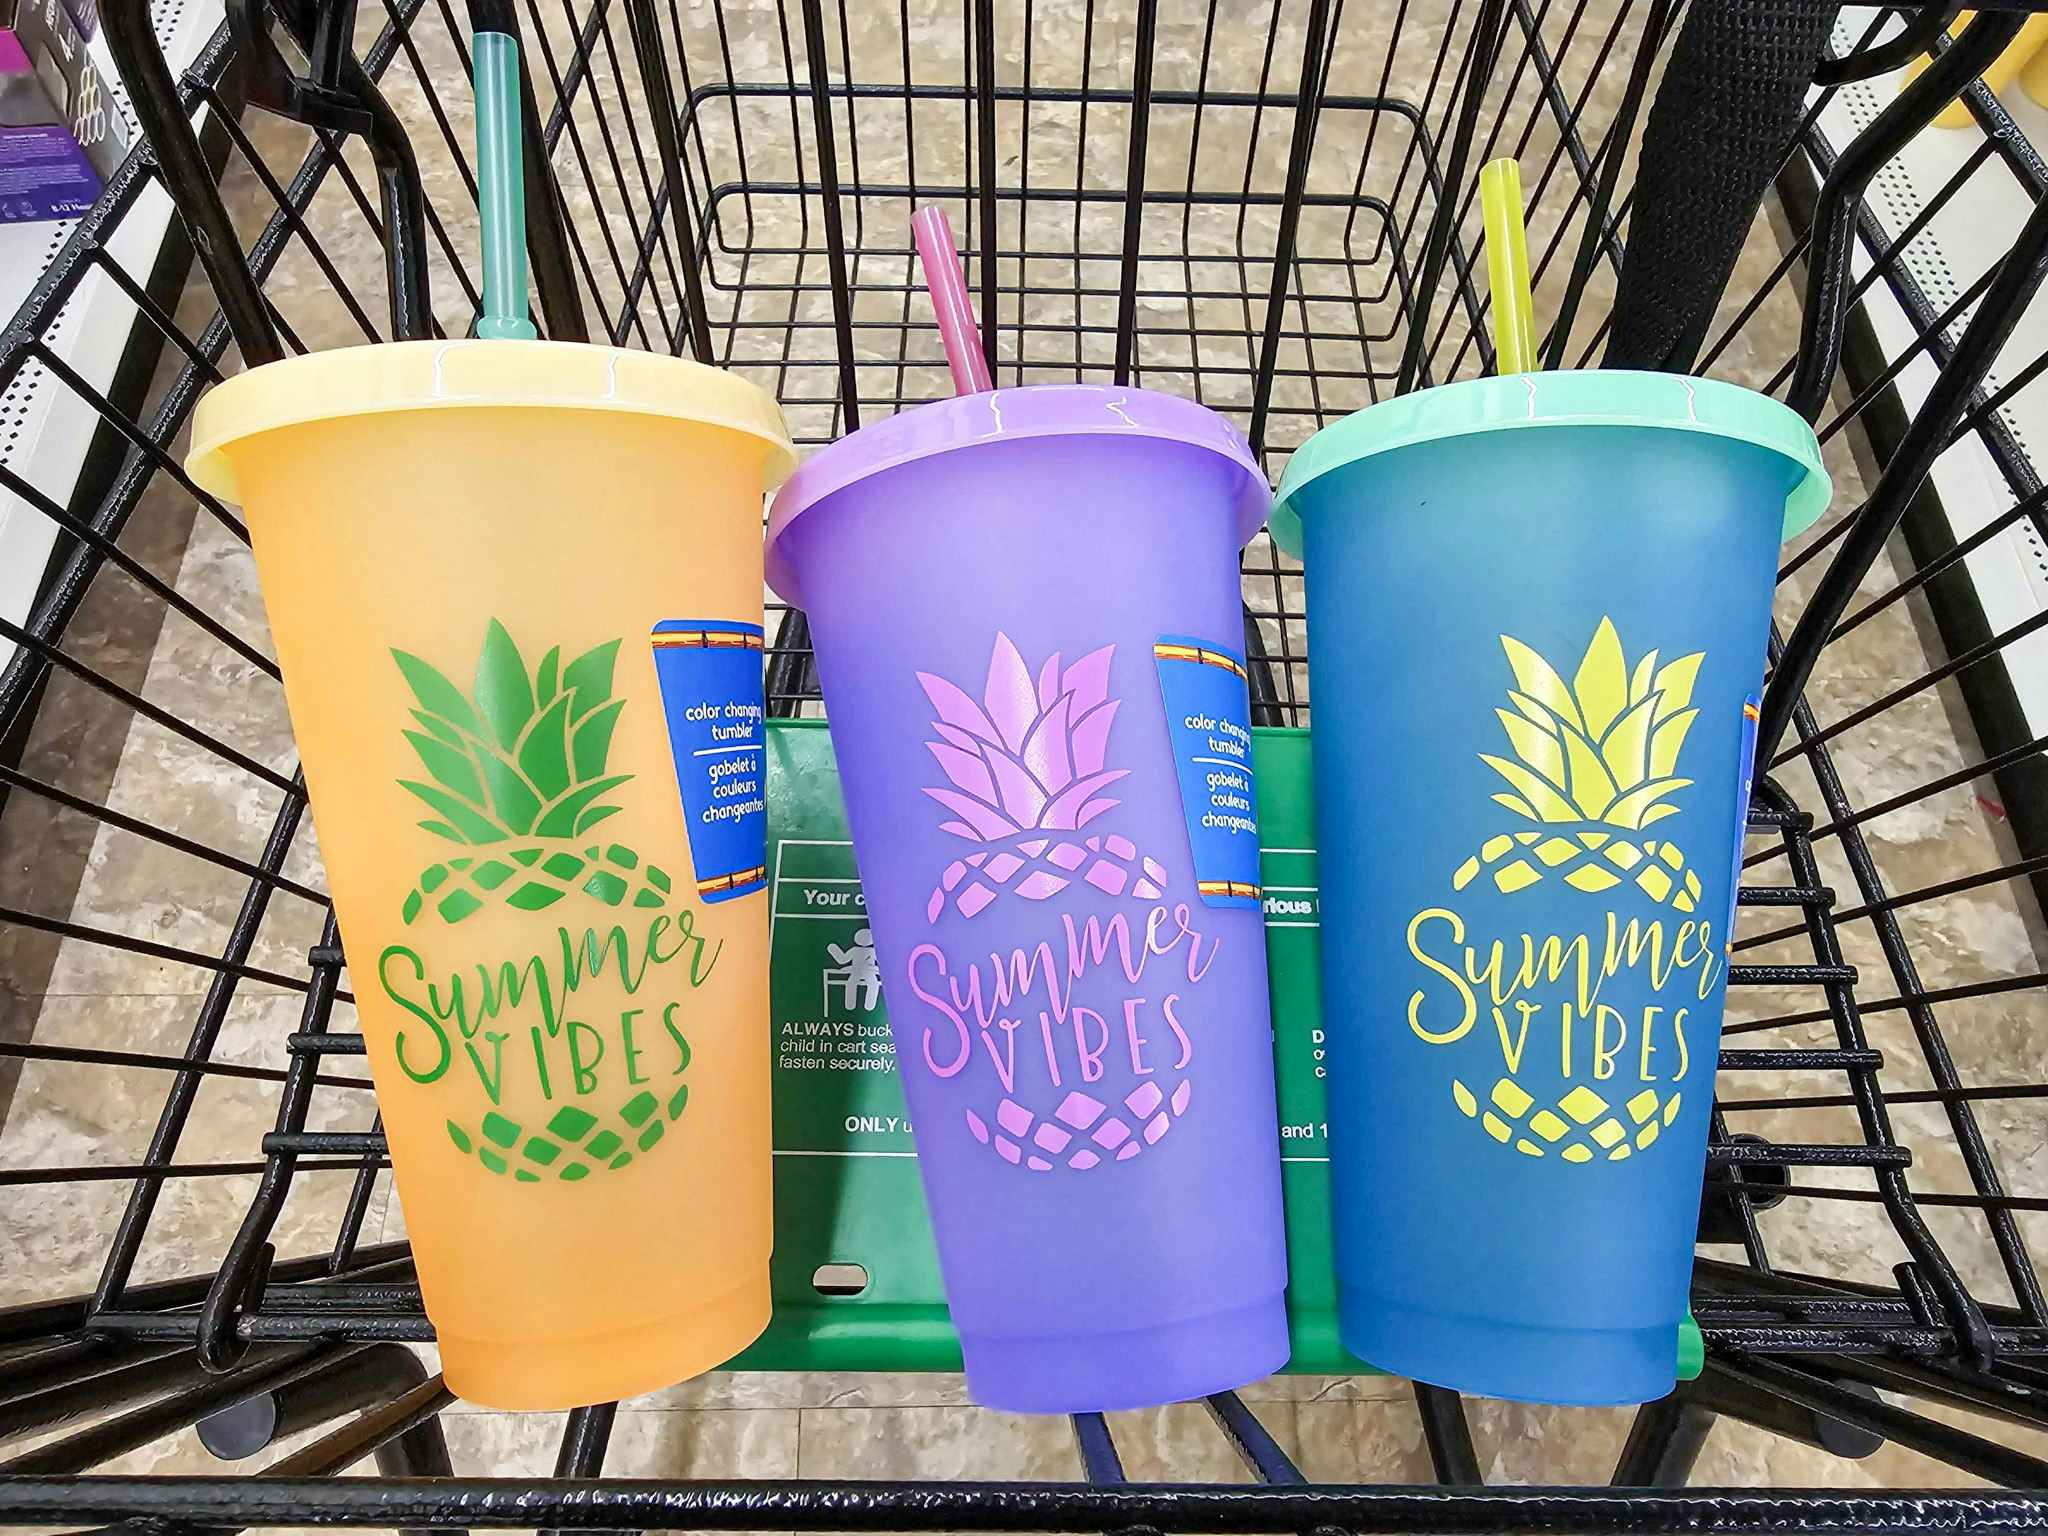 3 color changing cups in a cart